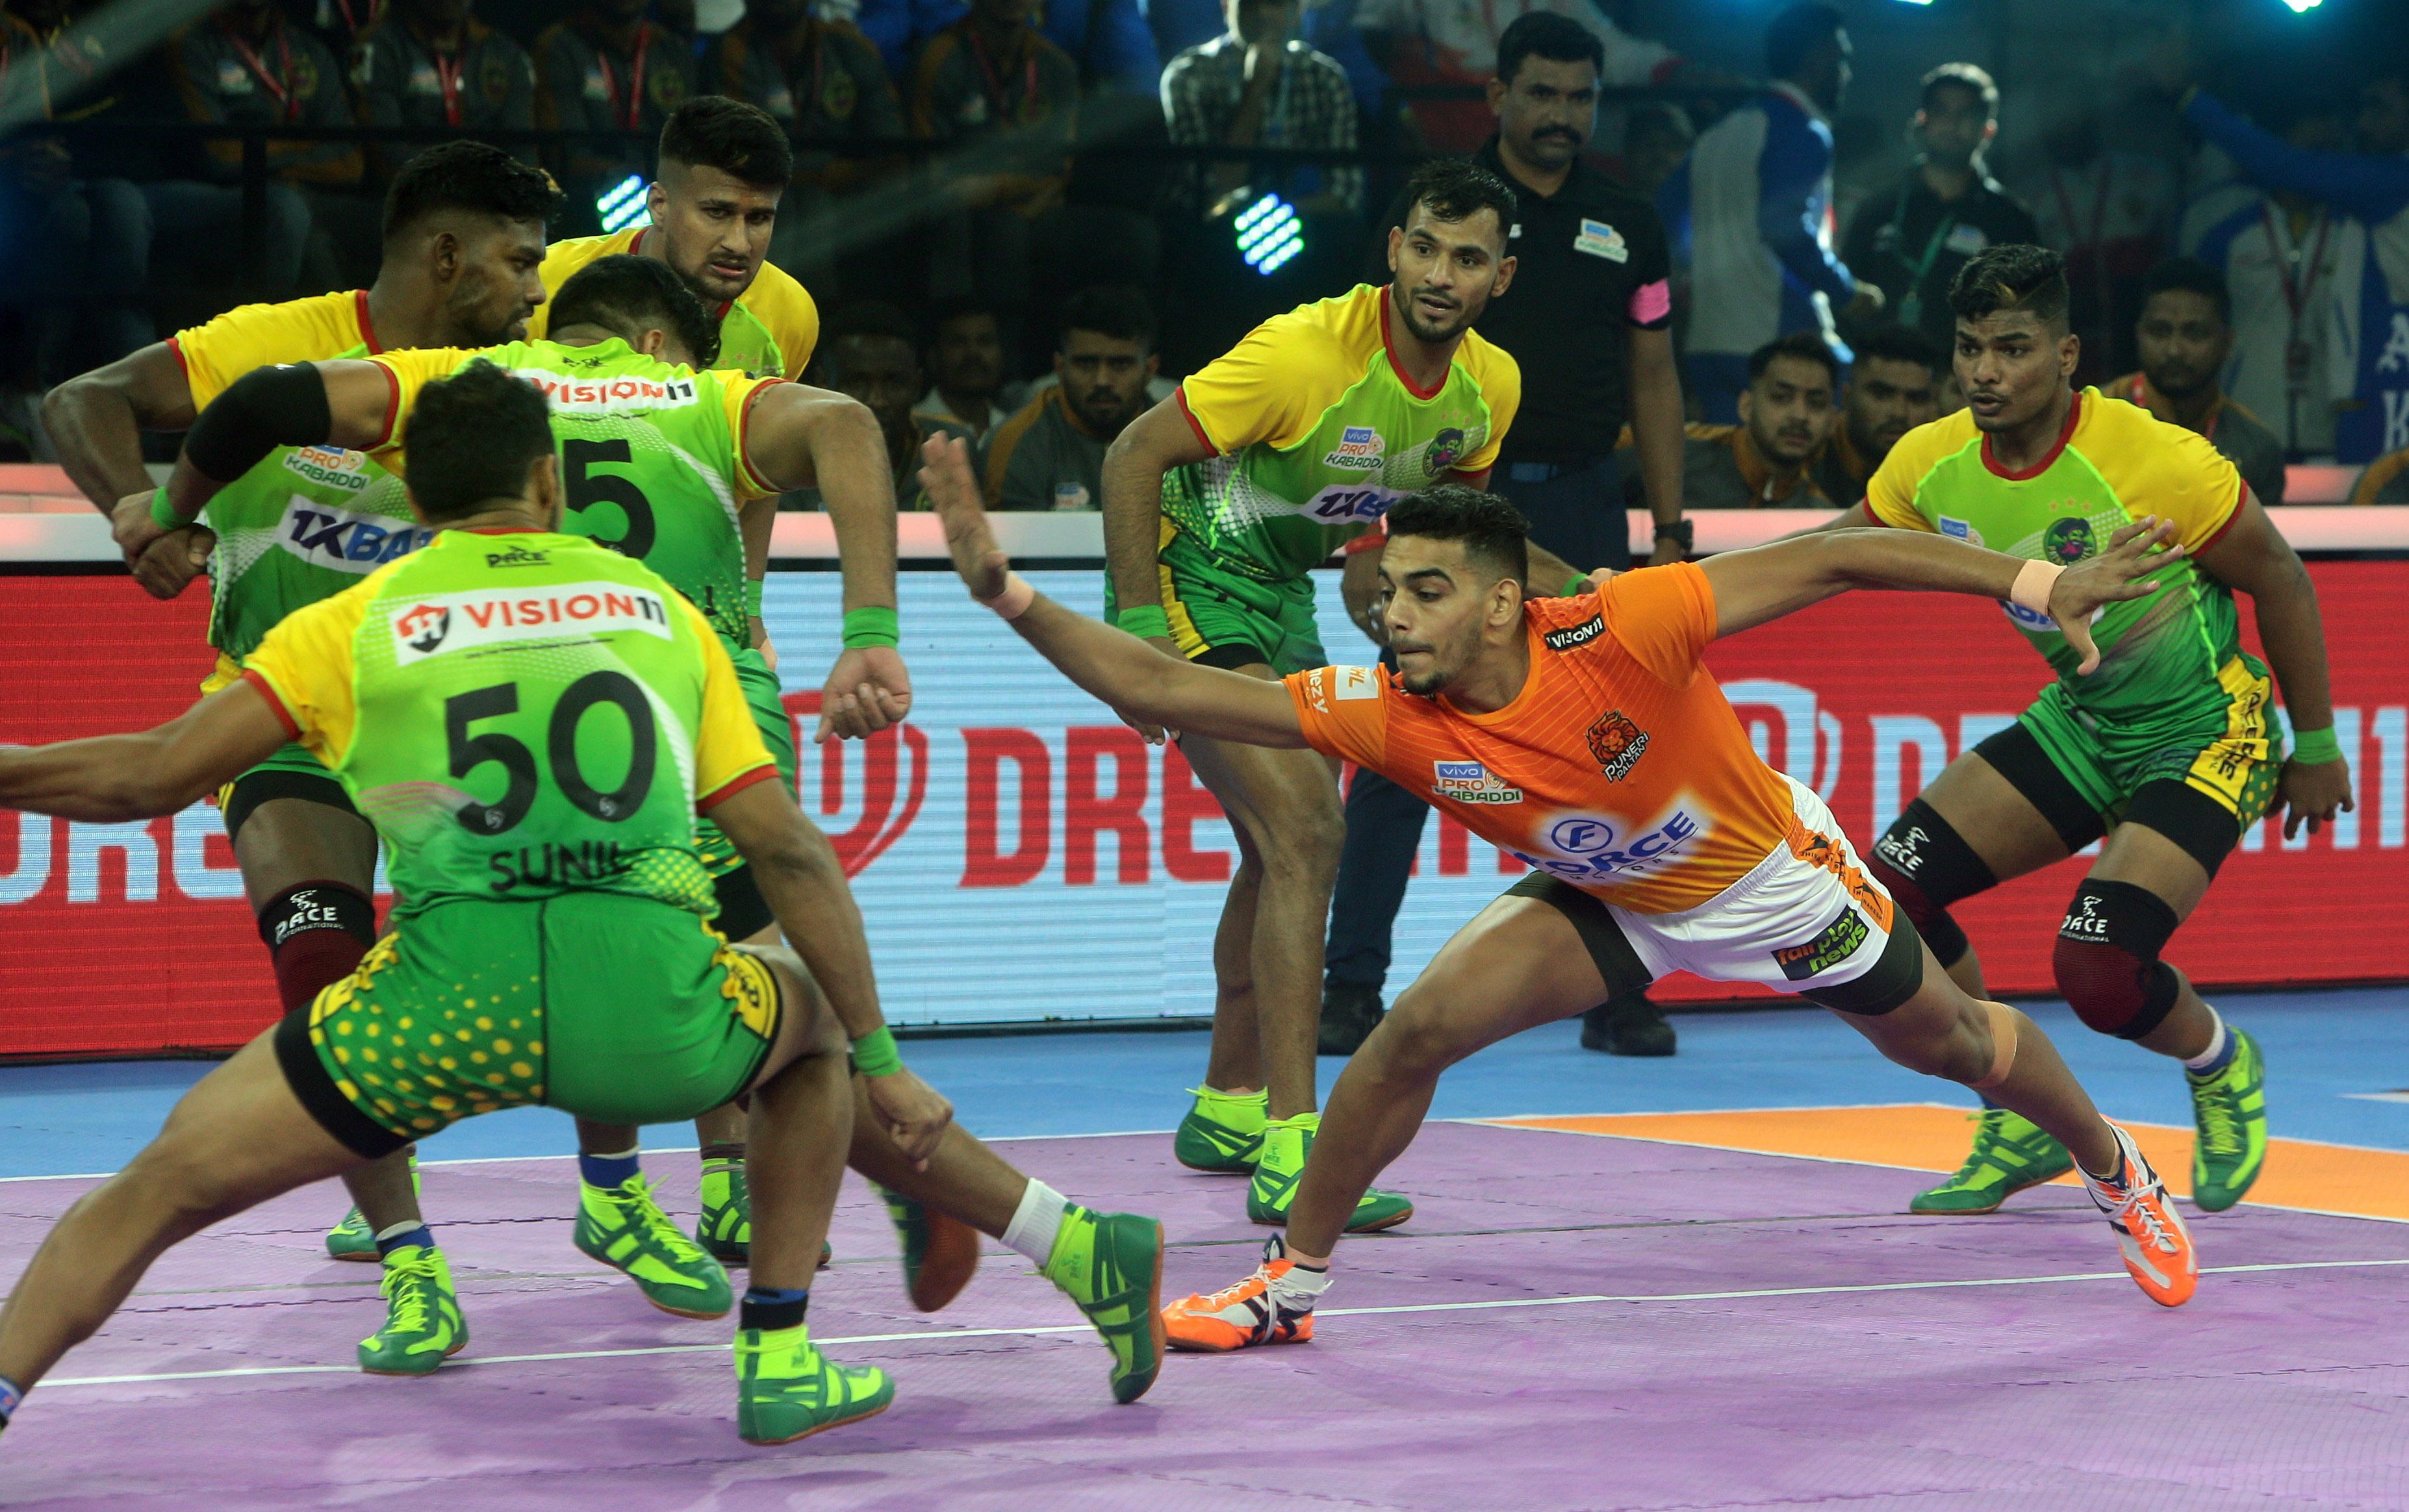 PKL 2022 Highlights: Record champions Patna Pirates and Puneri Paltan play out thrilling 34-34 tie in Pro Kabaddi League 9 opener